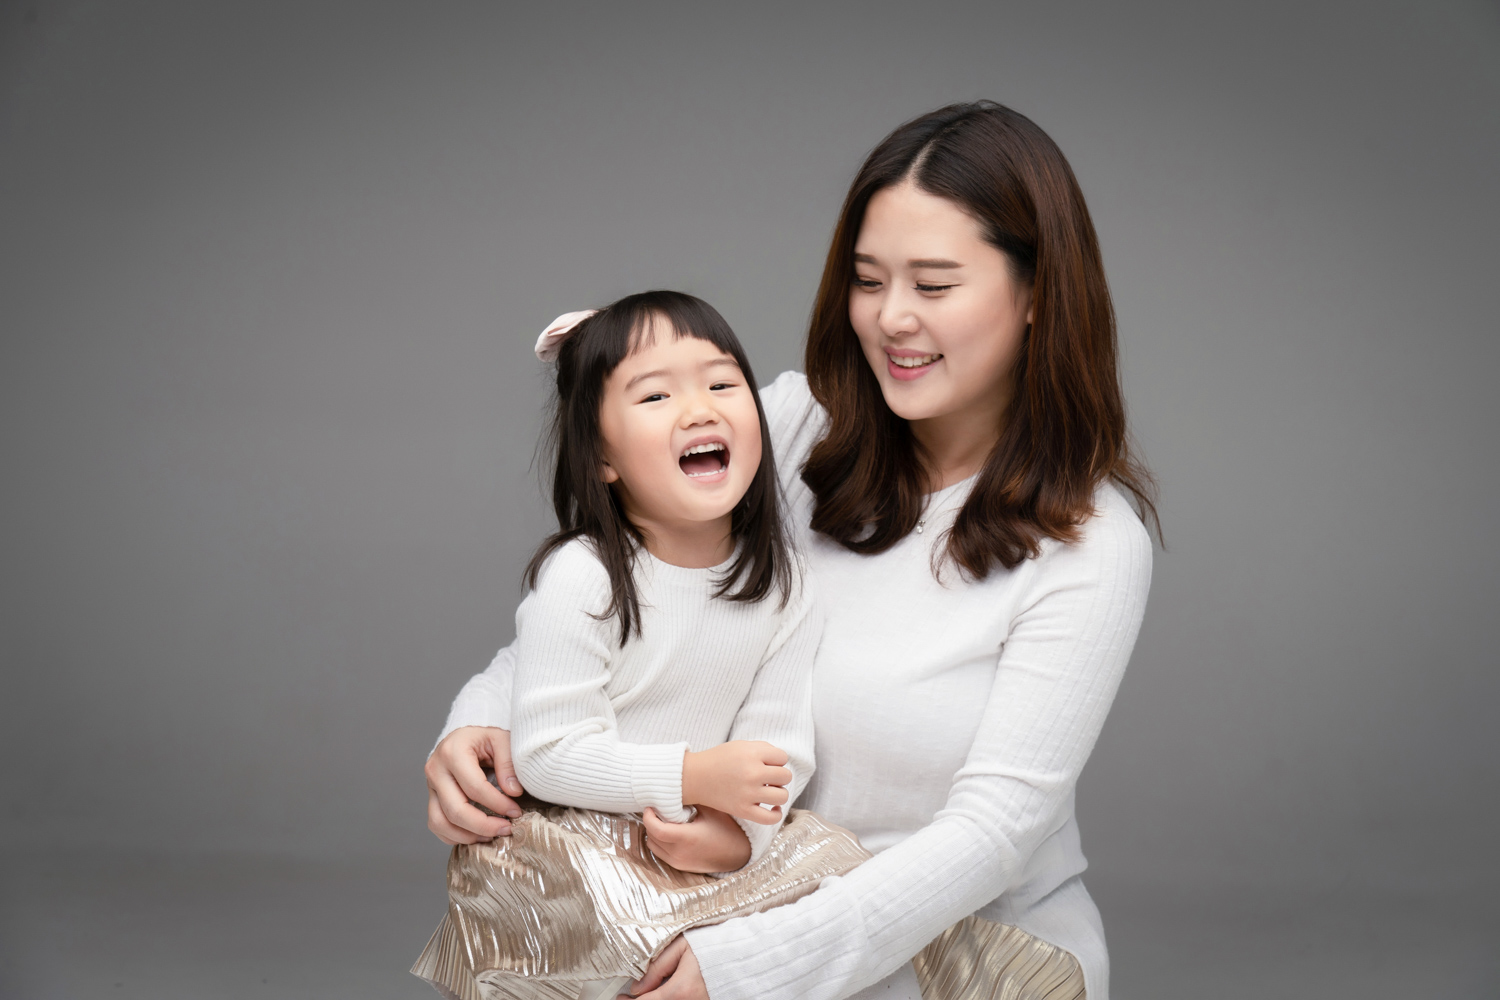 Daughter laughs with mom during a mother daughter photoshoot.